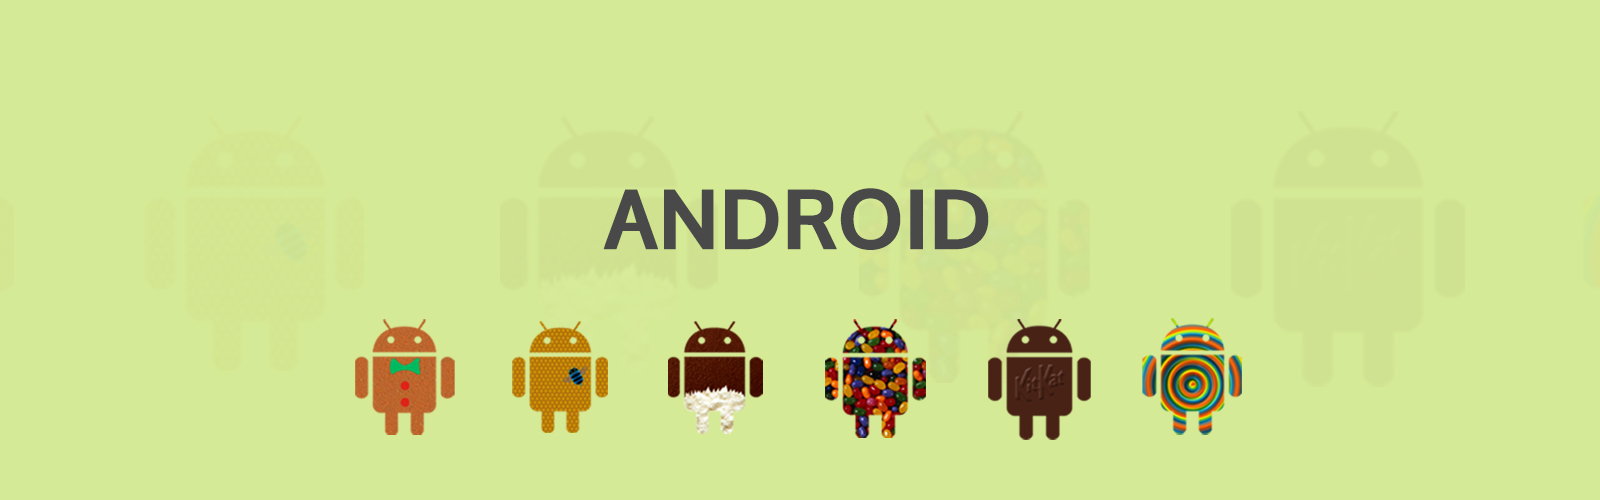 Android Game Application Development company in india